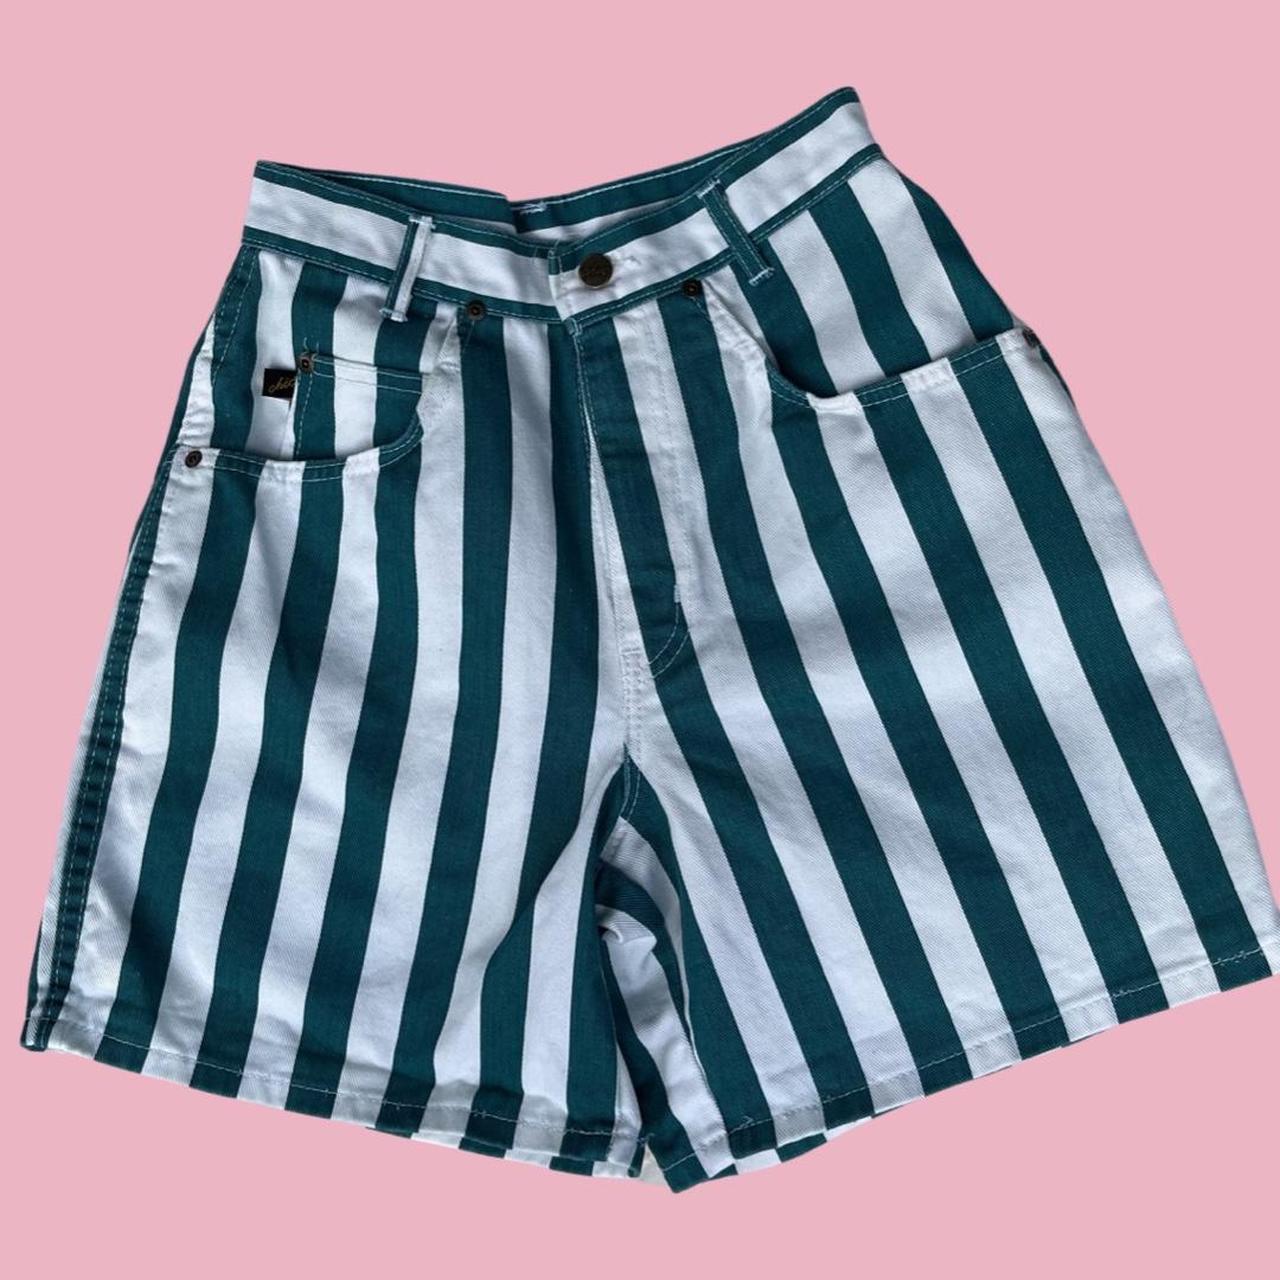 Chic Women's Green and White Shorts